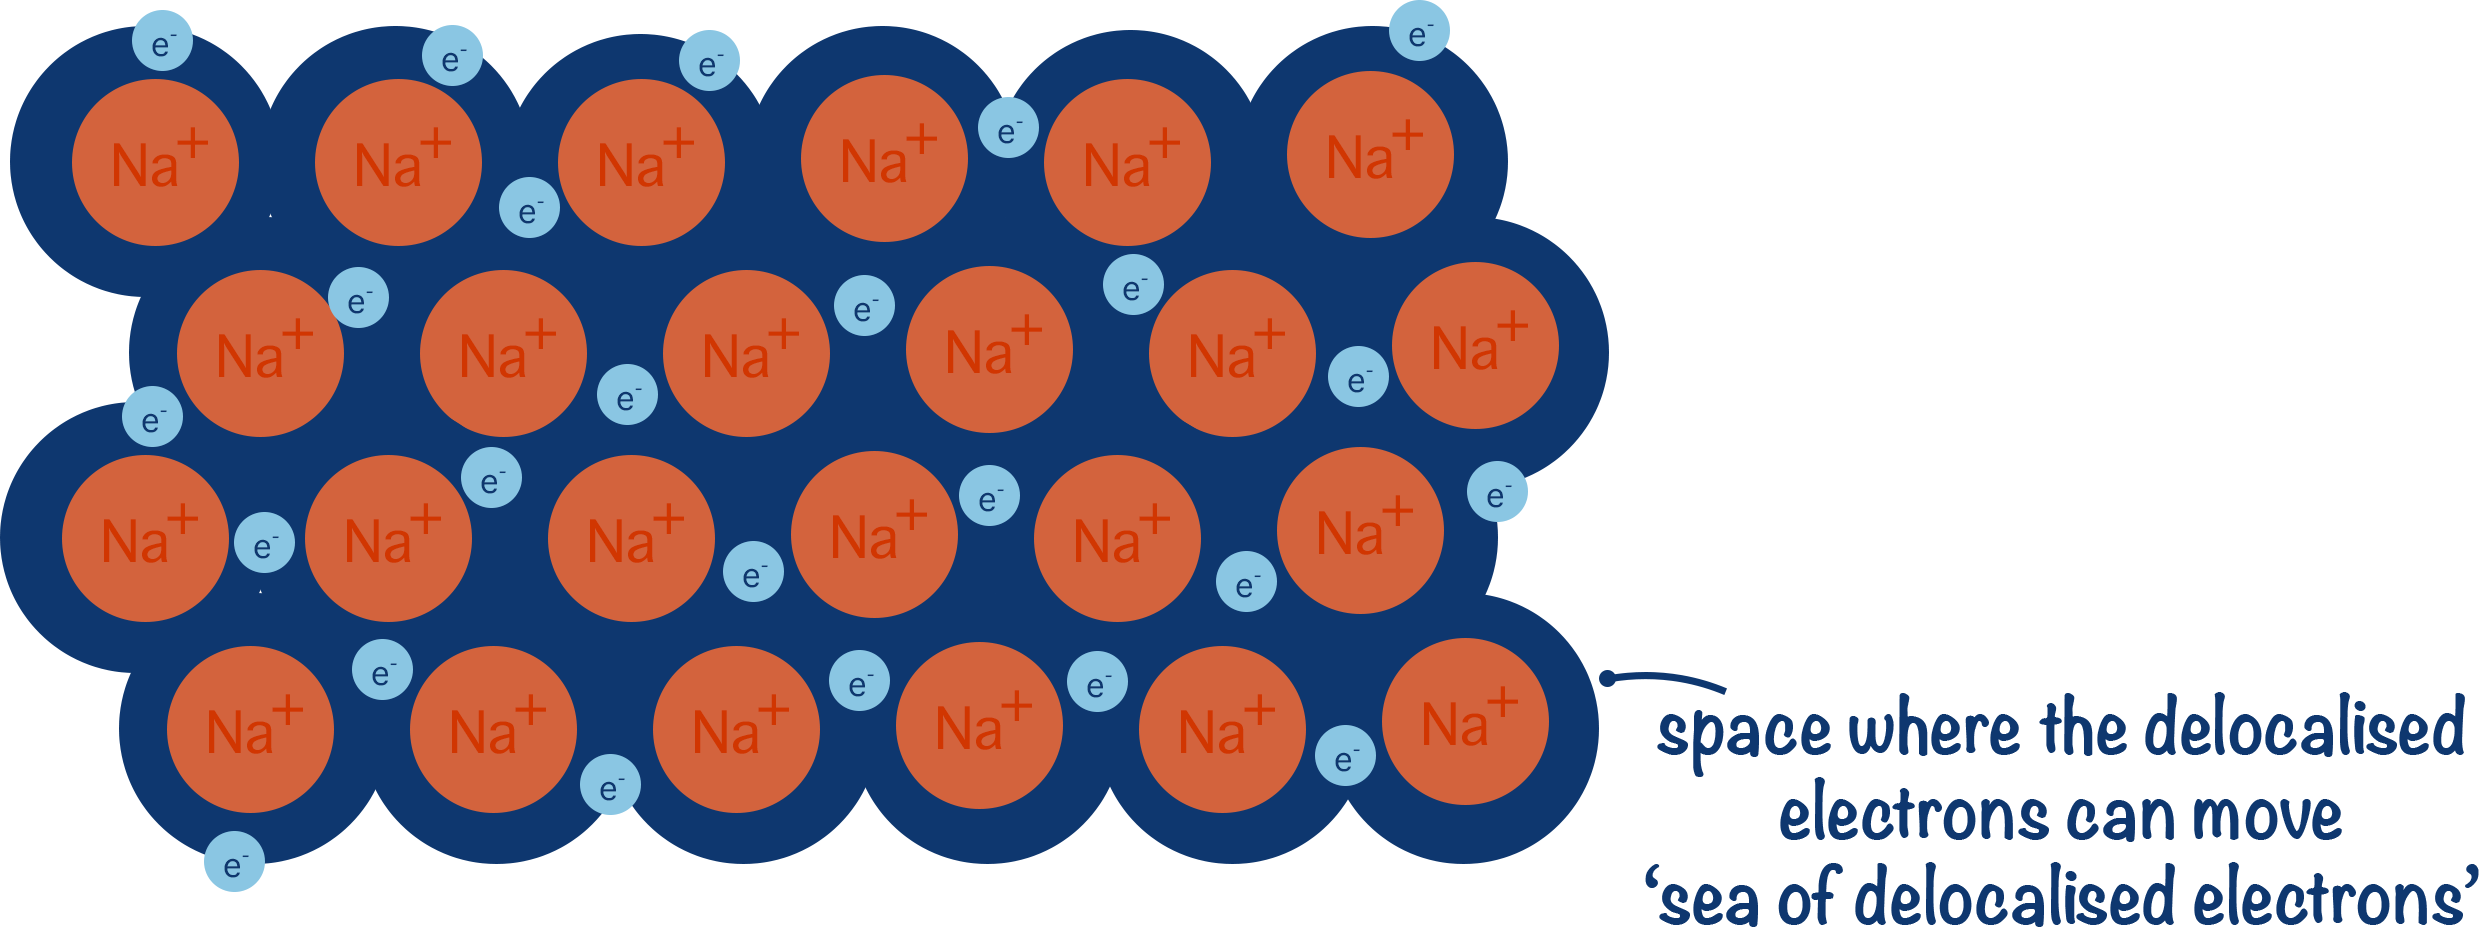 metallic bonding structure showing positively charged metal ions and delocalised electrons